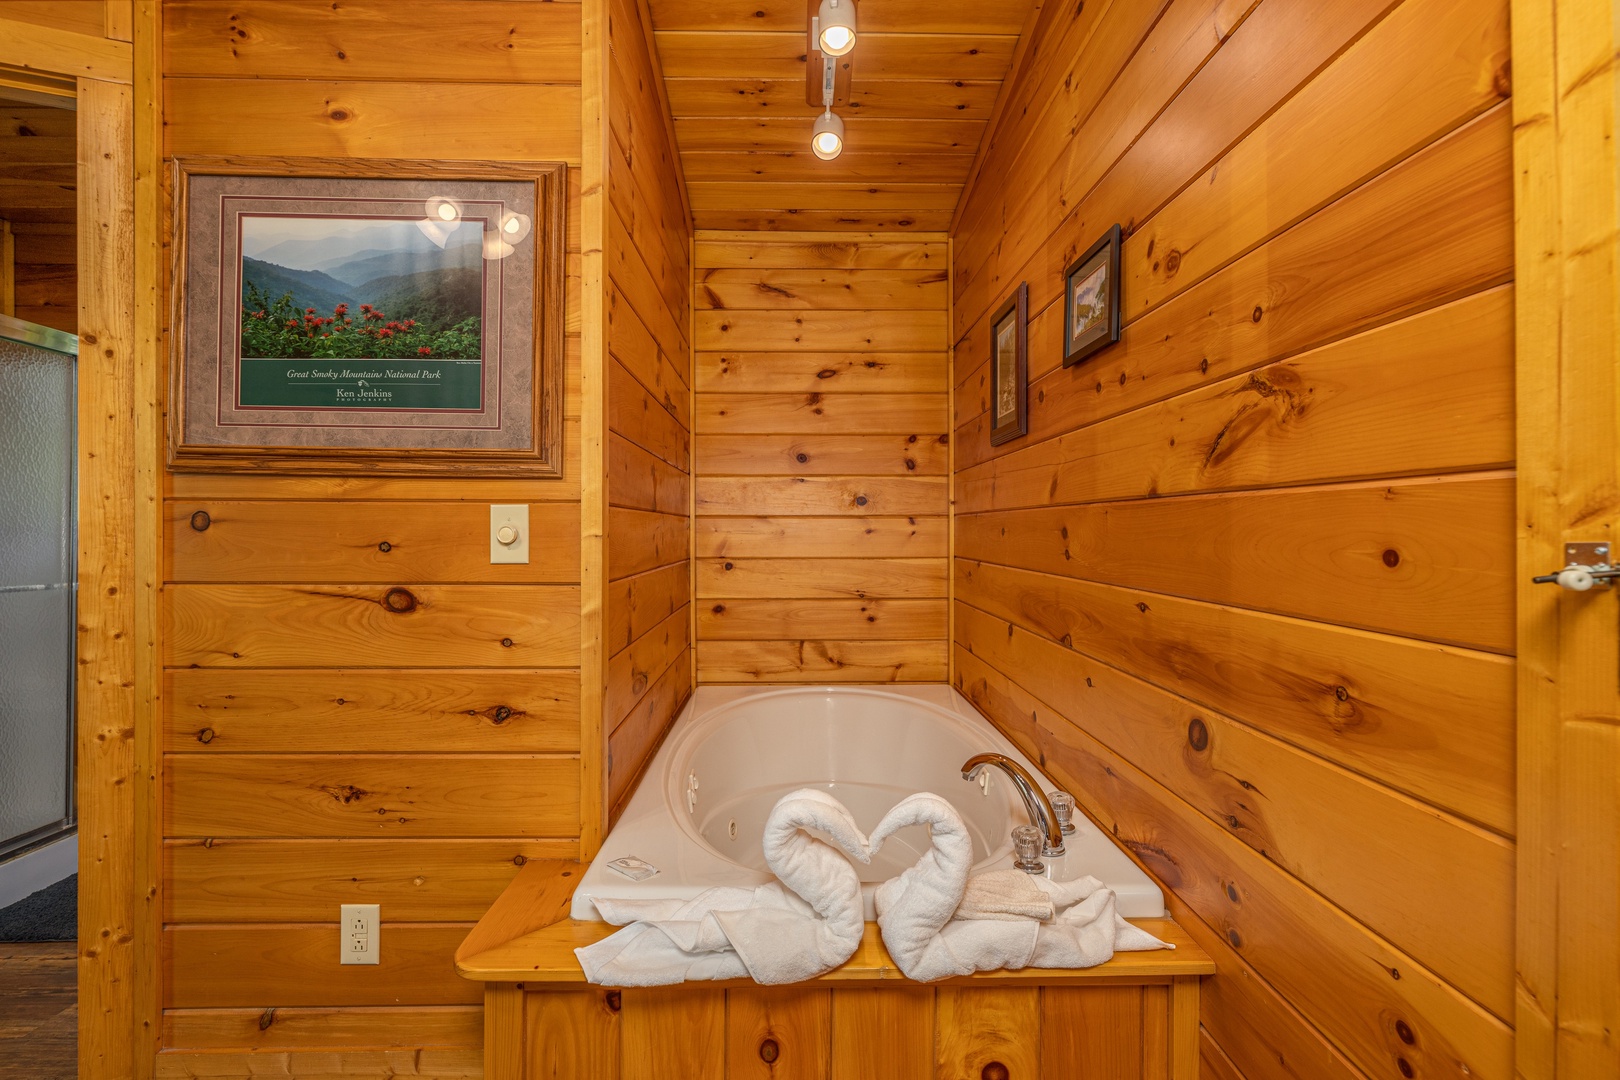 Jacuzzi at Moonlit Pines, a 2 bedroom cabin rental located in Pigeon Forge